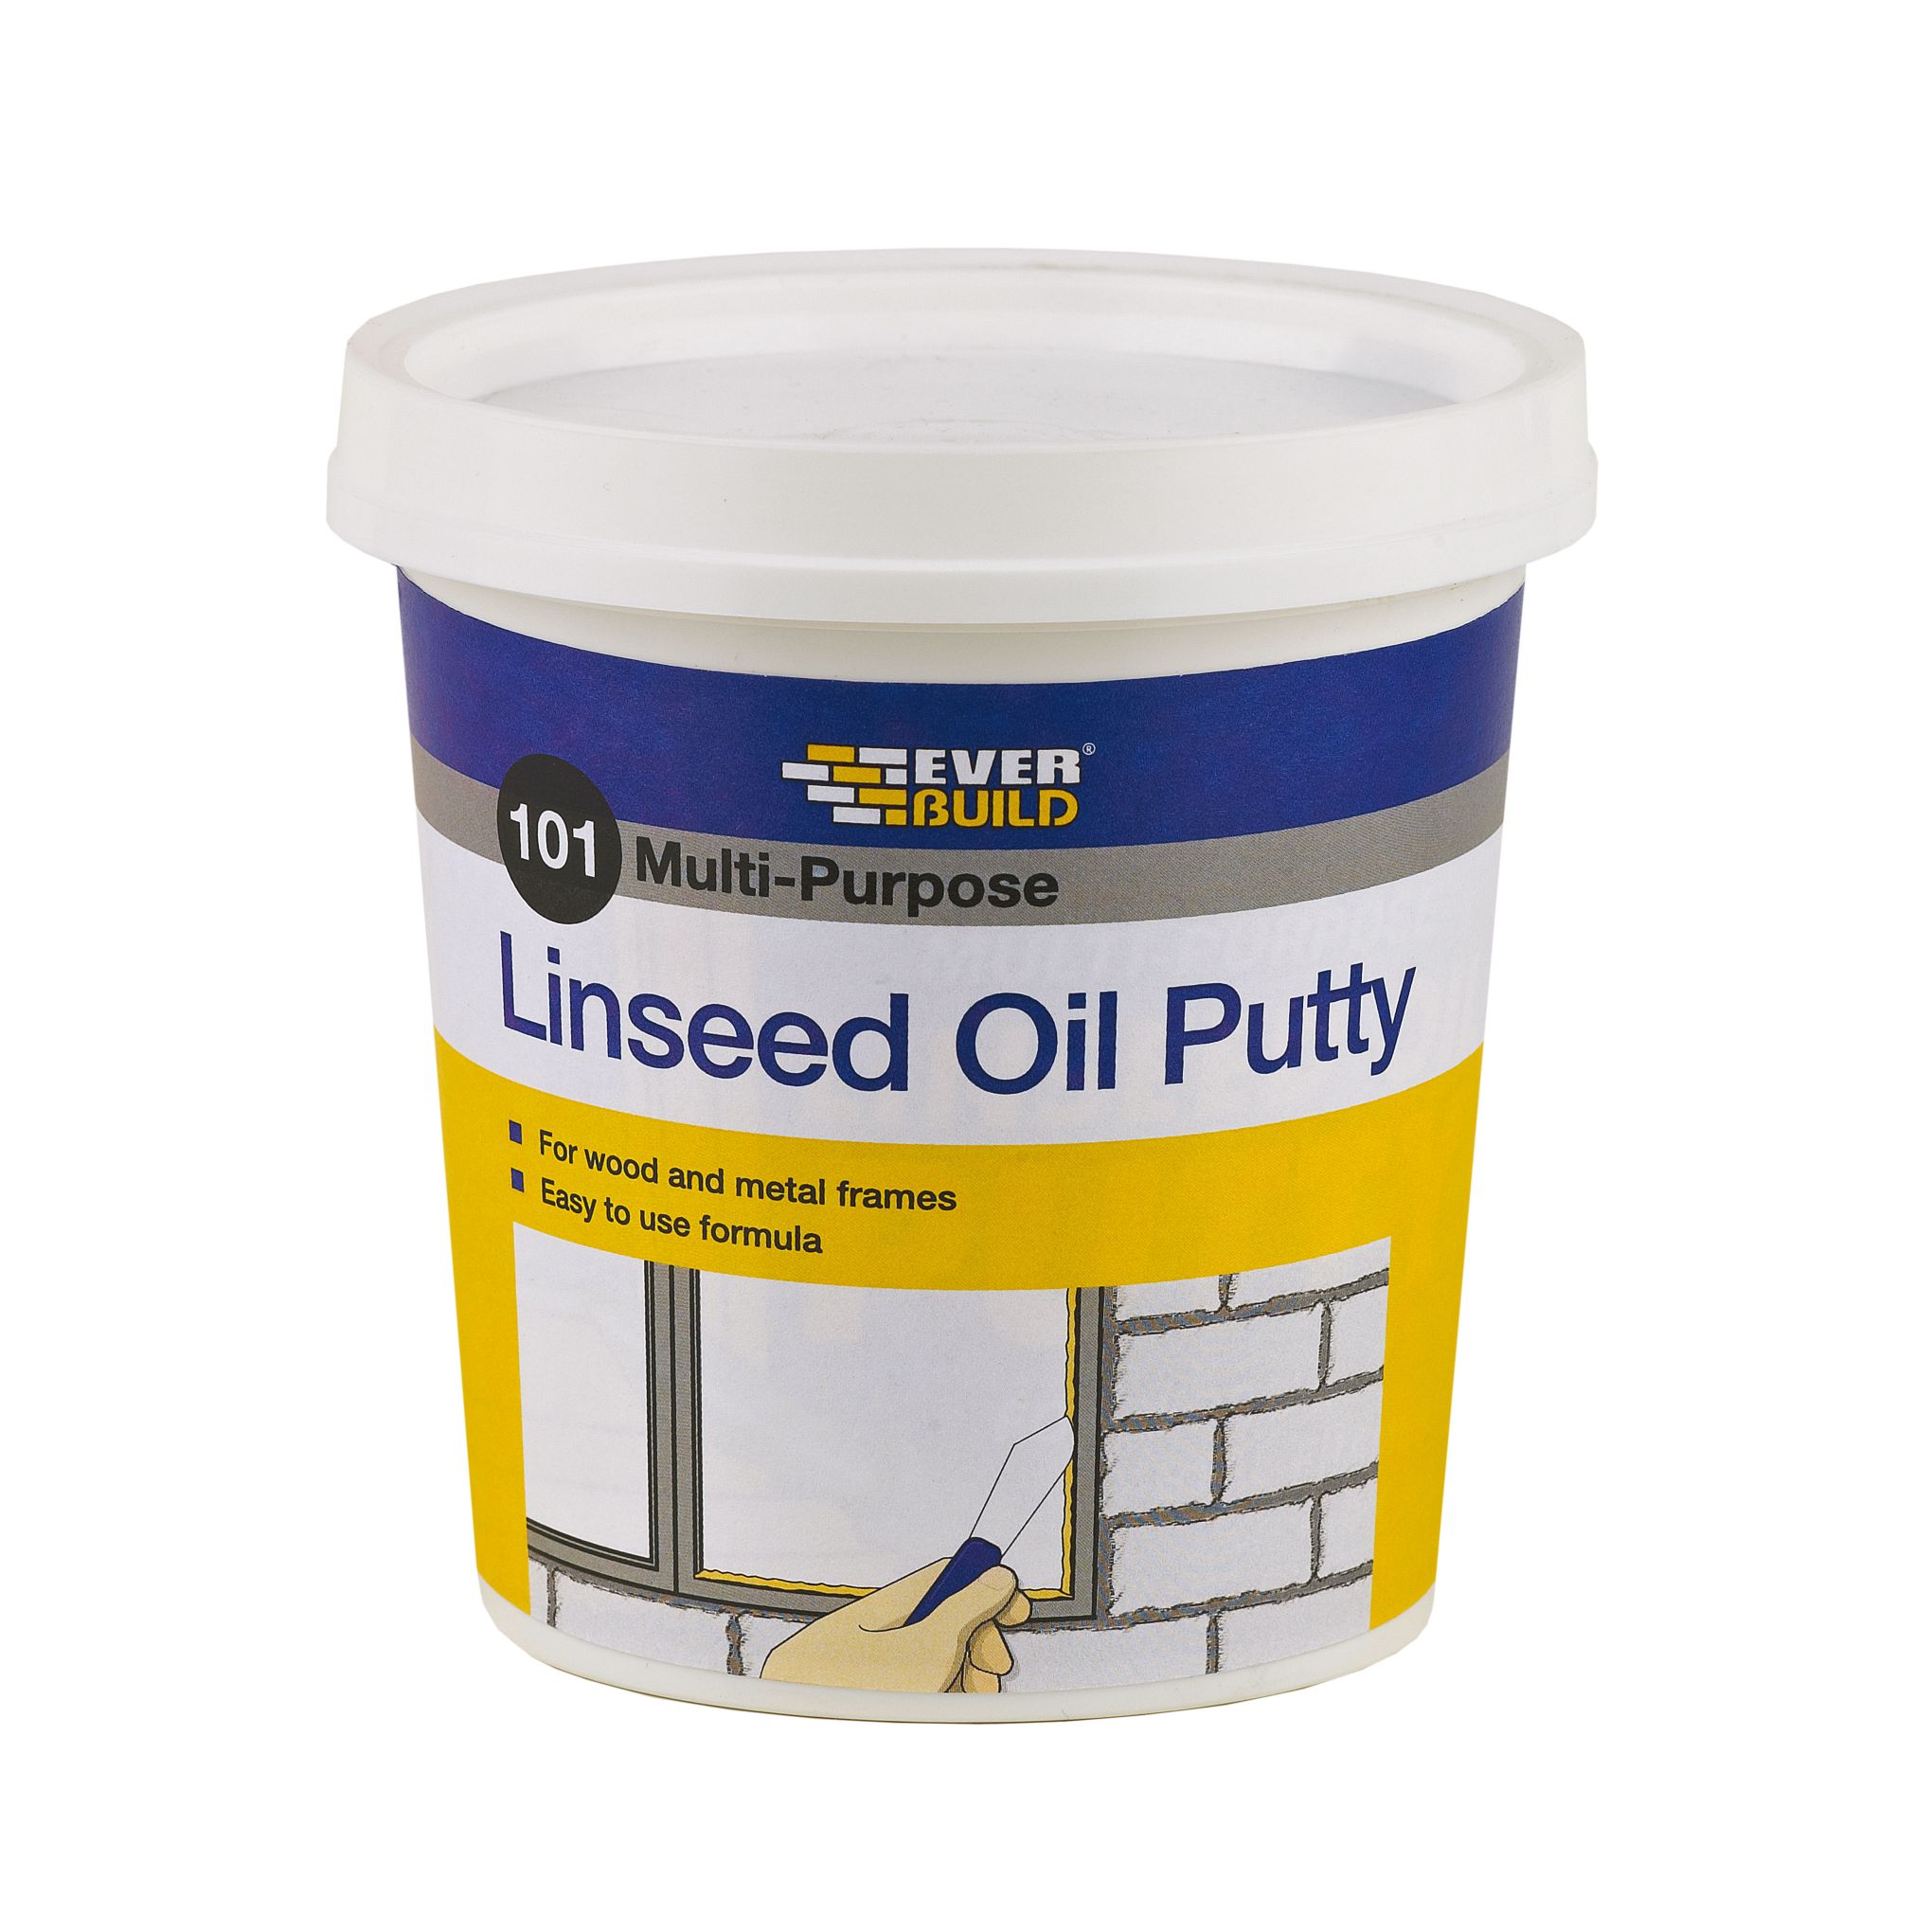 101 MULTI PURPOSE LINSEED OIL PUTTY 2KG NATURAL